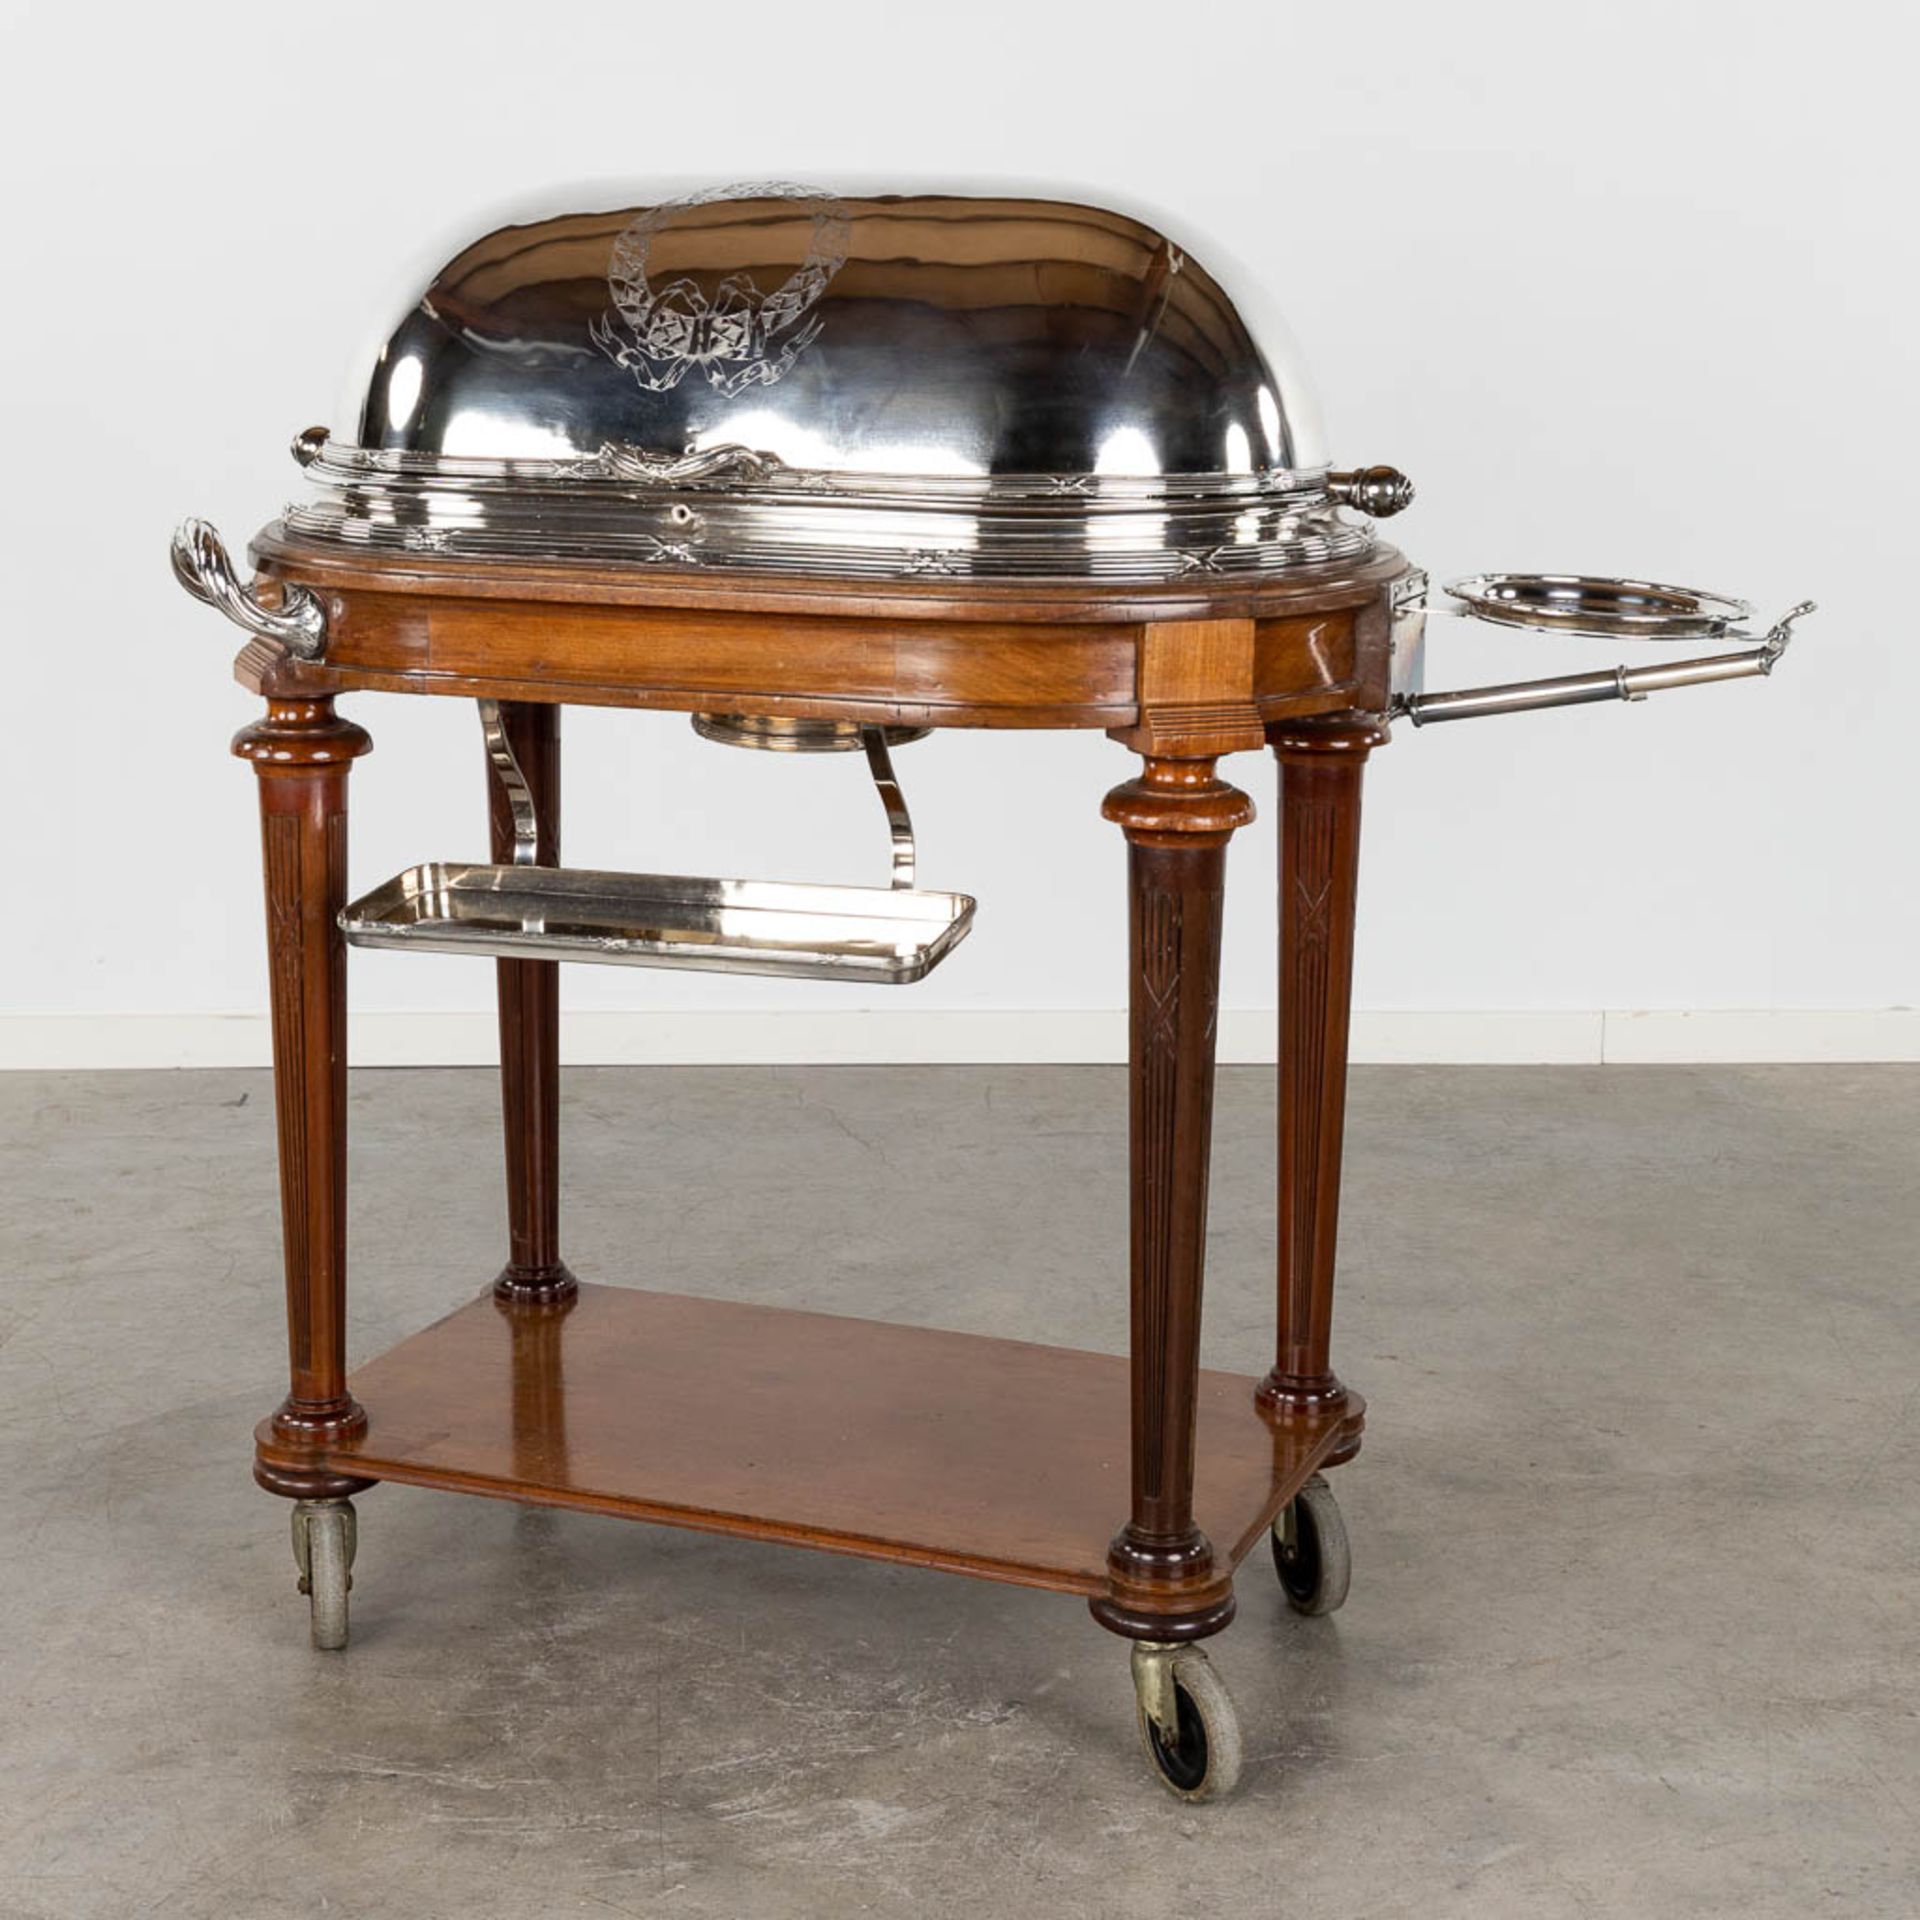 Wiskemann, an exceptional serving cart, silver-plated metal on a scultpured wood base. (D:62 x W:120